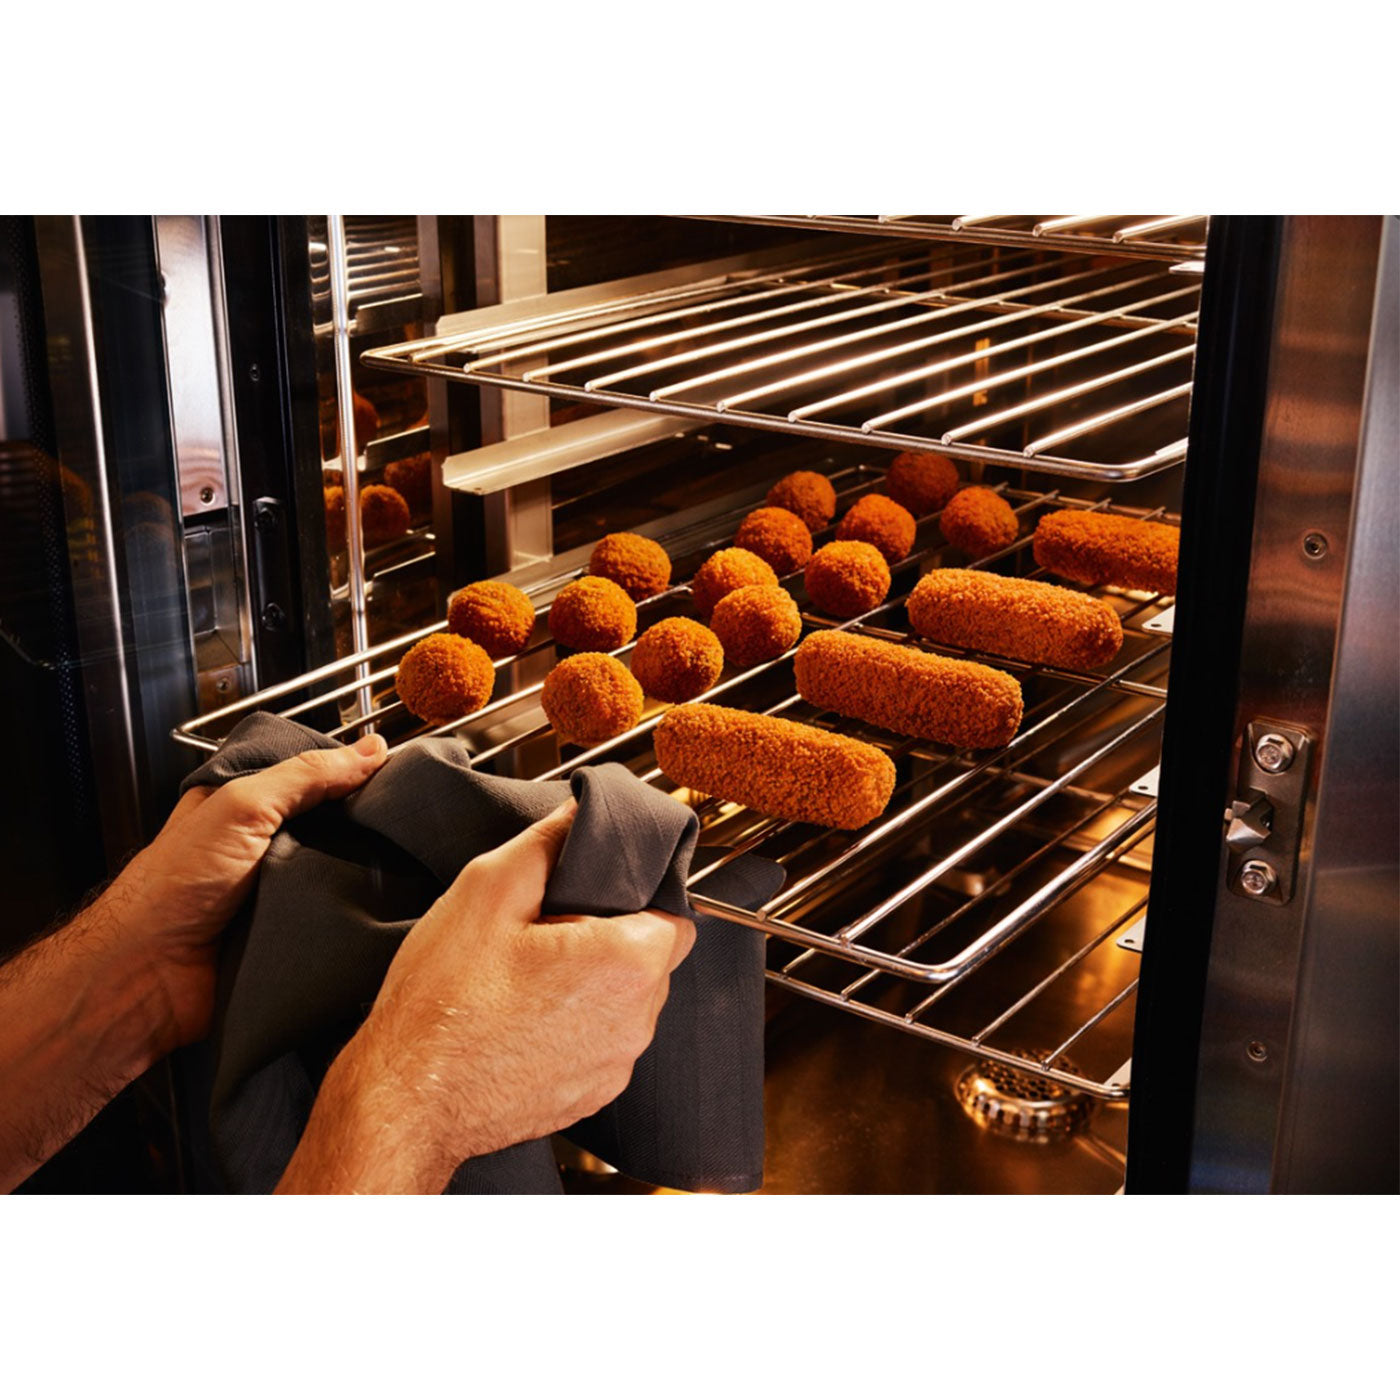 De Bourgondiër OVEN Croquettes For Oven & Airfryer - 20x100g - Crispy Dutch Treat - Delicious Pulled Meat - Image 4